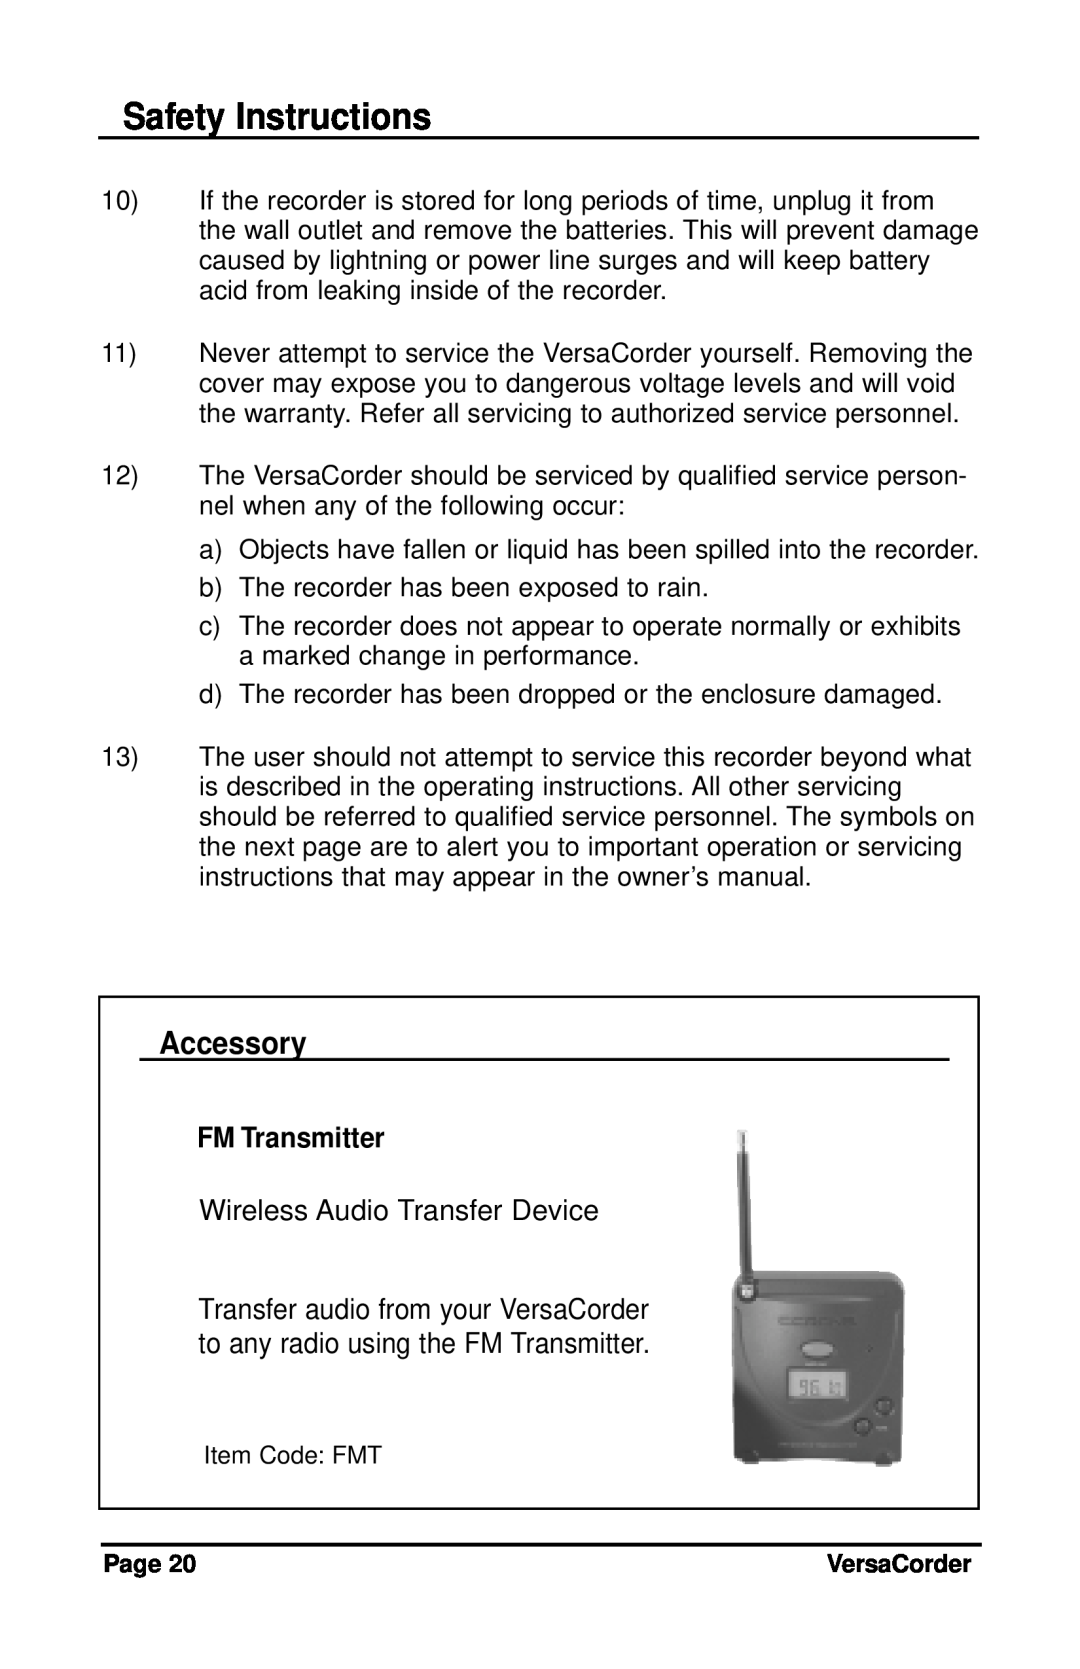 C. Crane VersaCorder Dual Speed Recorder Safety Instructions, Accessory, FM Transmitter, Wireless Audio Transfer Device 